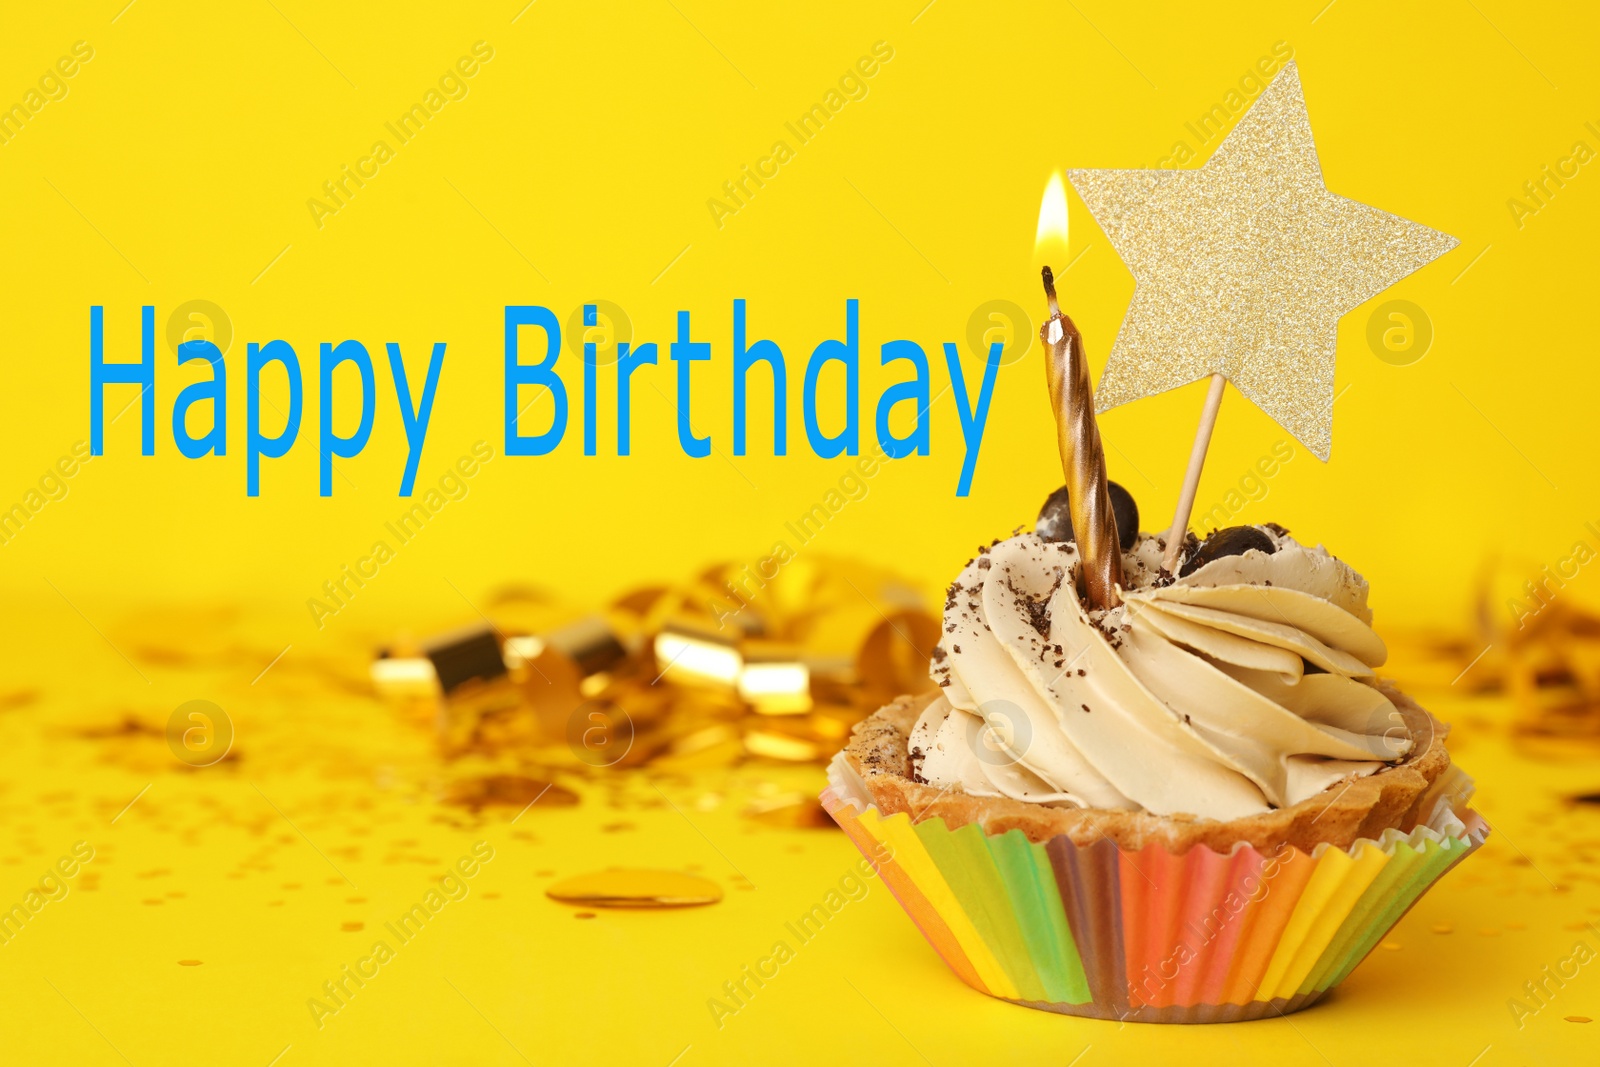 Photo of Birthday cupcake with candle and text Happy Birthday on yellow background